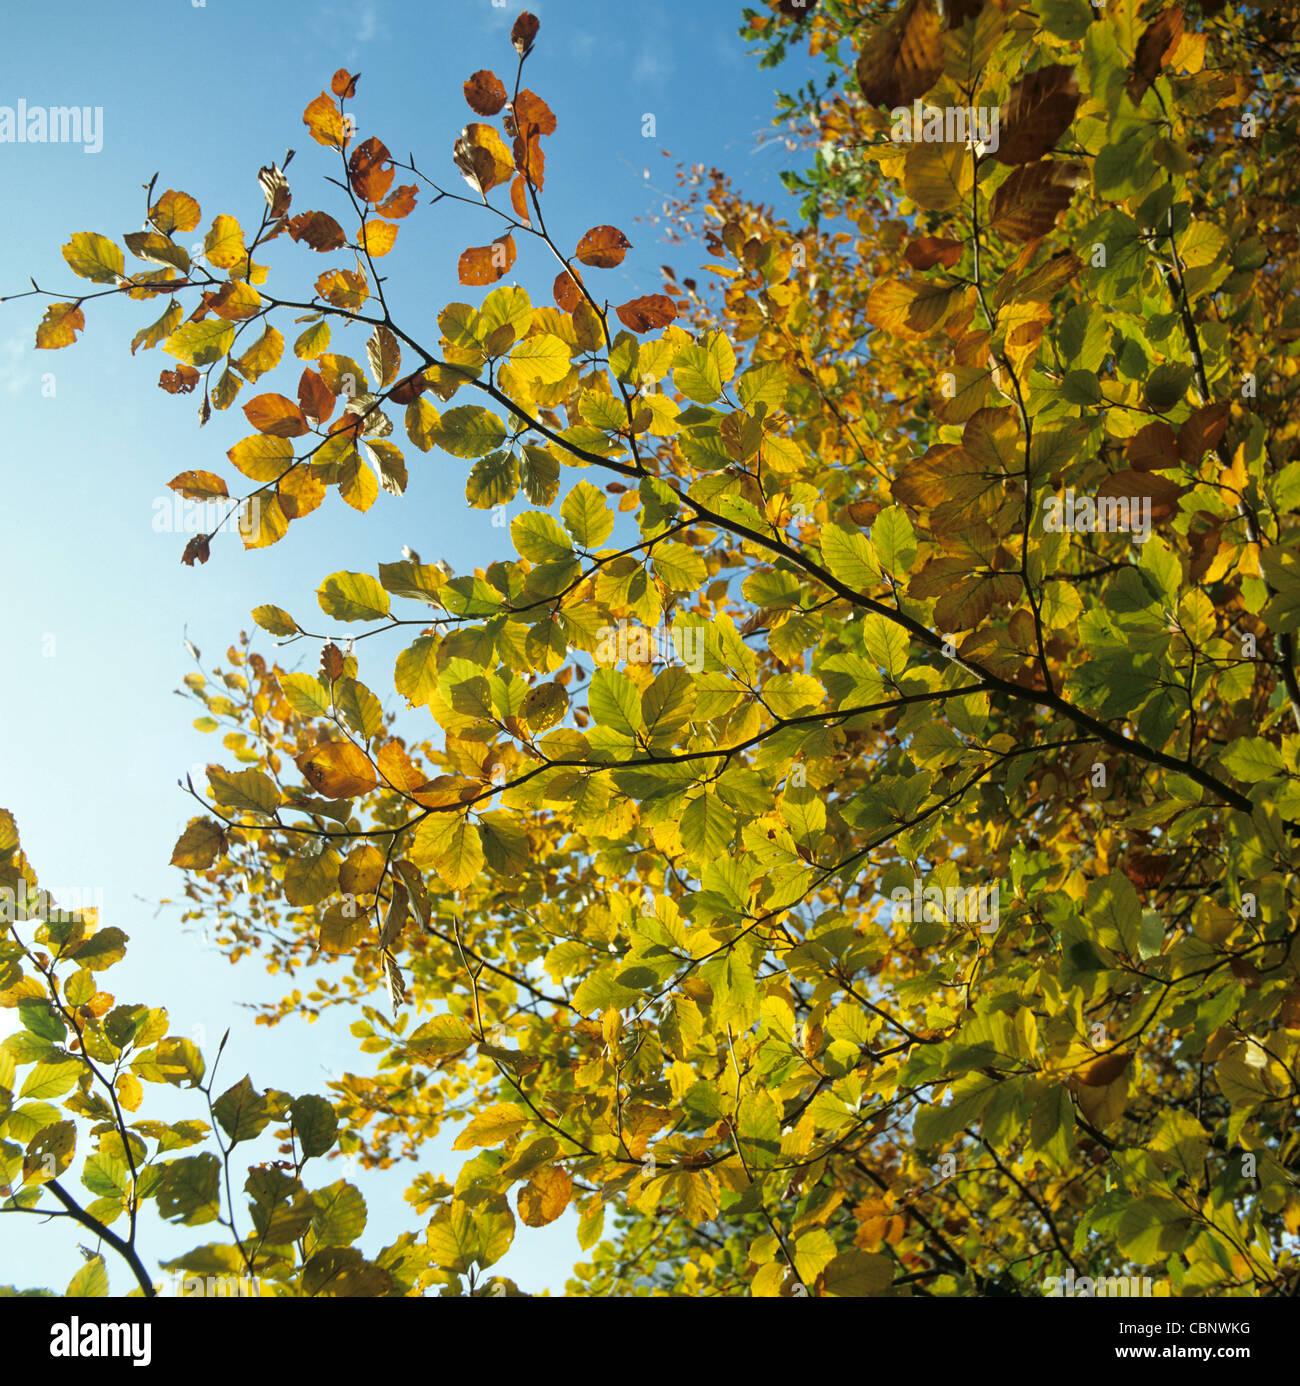 Beech leaves in autumn colour in Savernake Forest against a clear blue sky Stock Photo